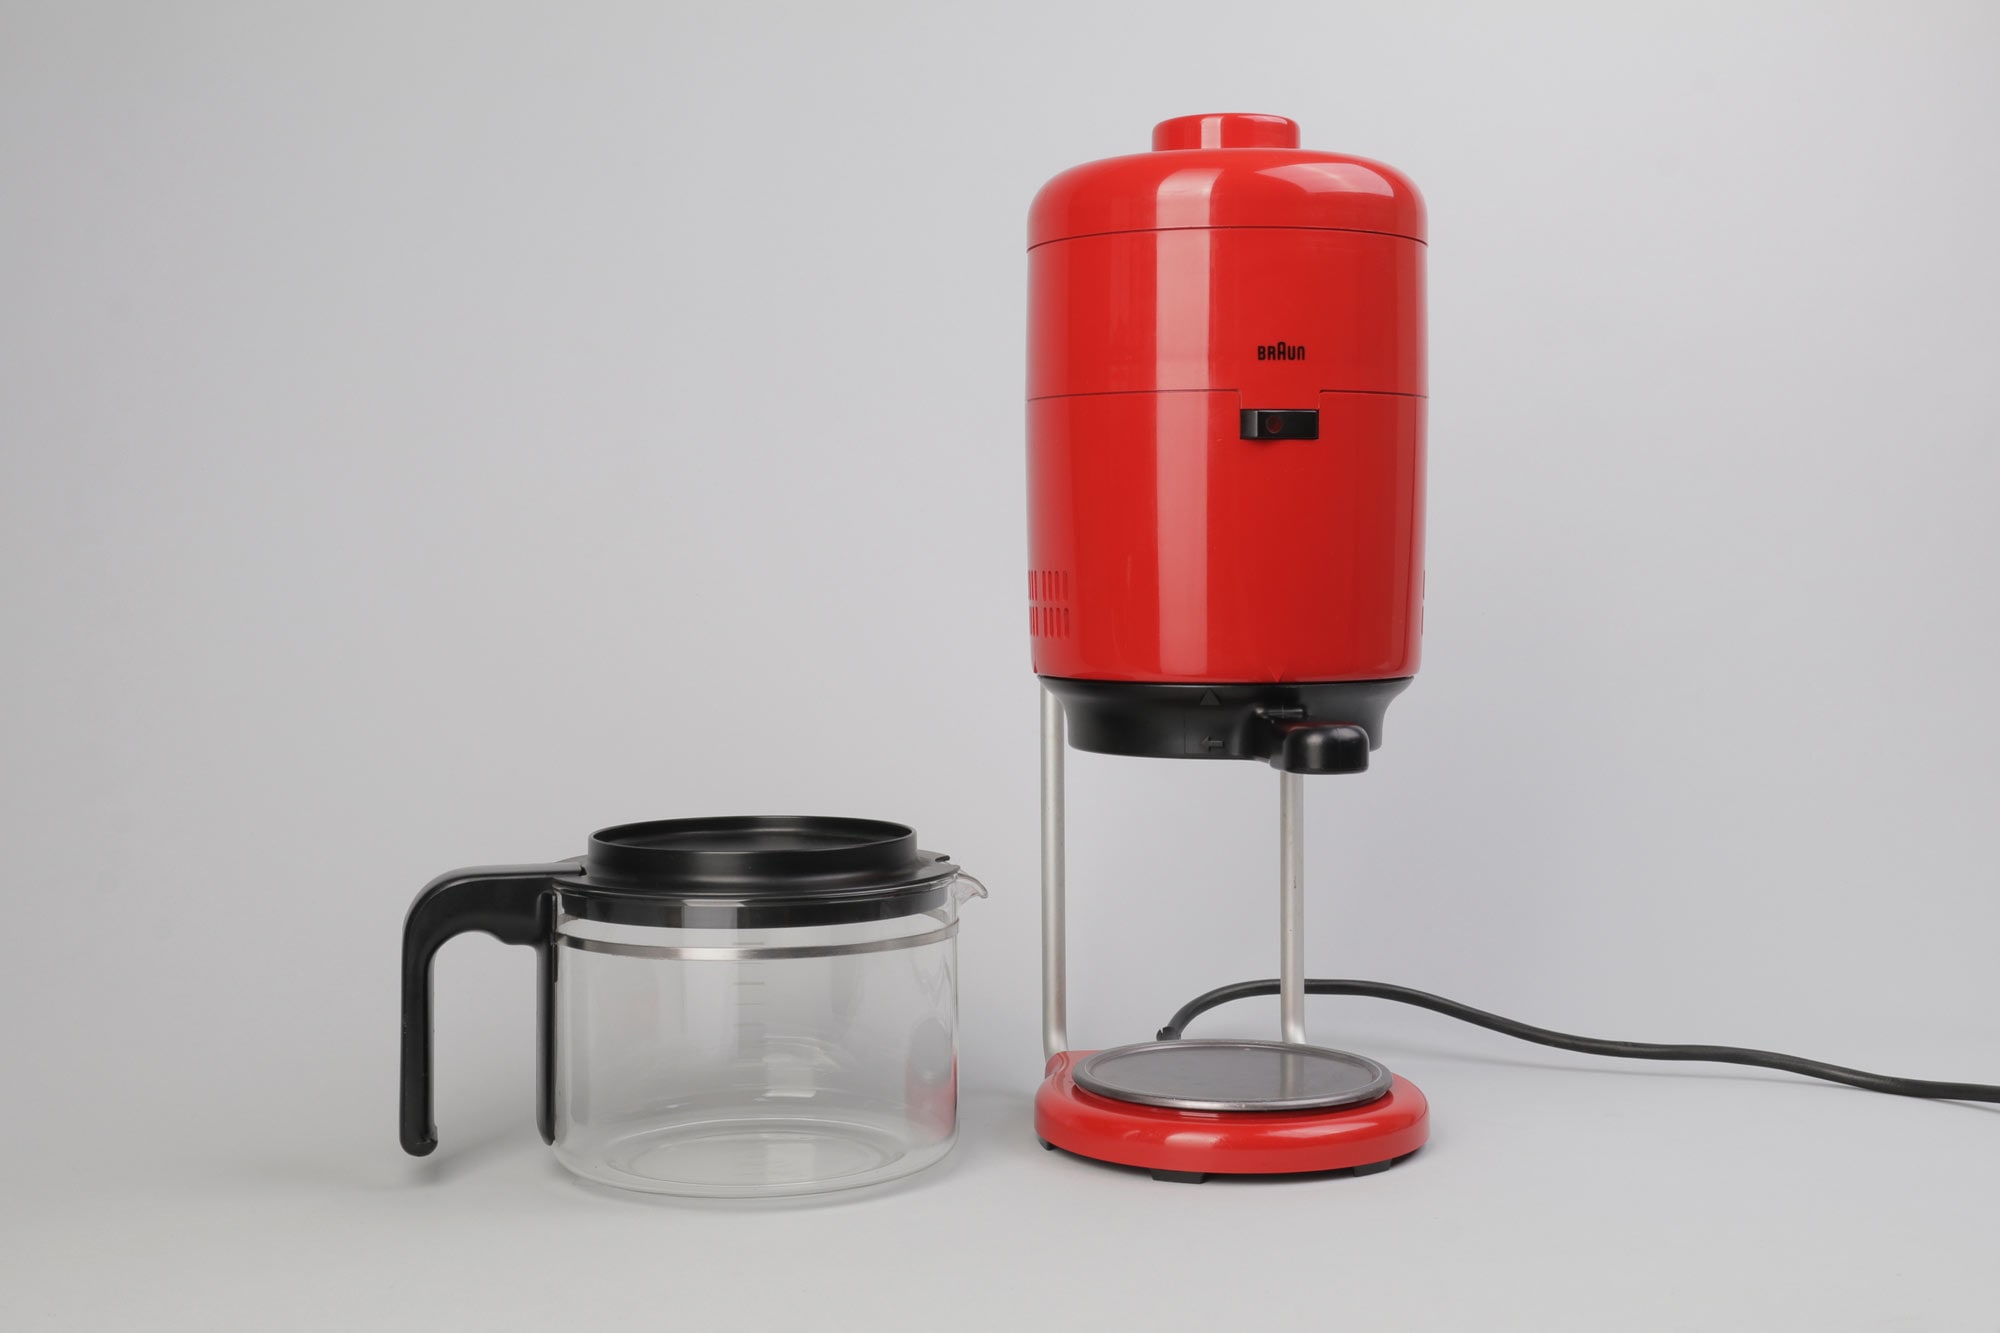 https://onlyonceshop.com/media/pages/product/braun-kf-20/8d66b29693-1650541407/iconic-braun-aromaster-kf-20-kf20-coffee-maker-in-orange-red-designed-by-florian-seiffert-germany-1972-only-once-shop-5.jpg